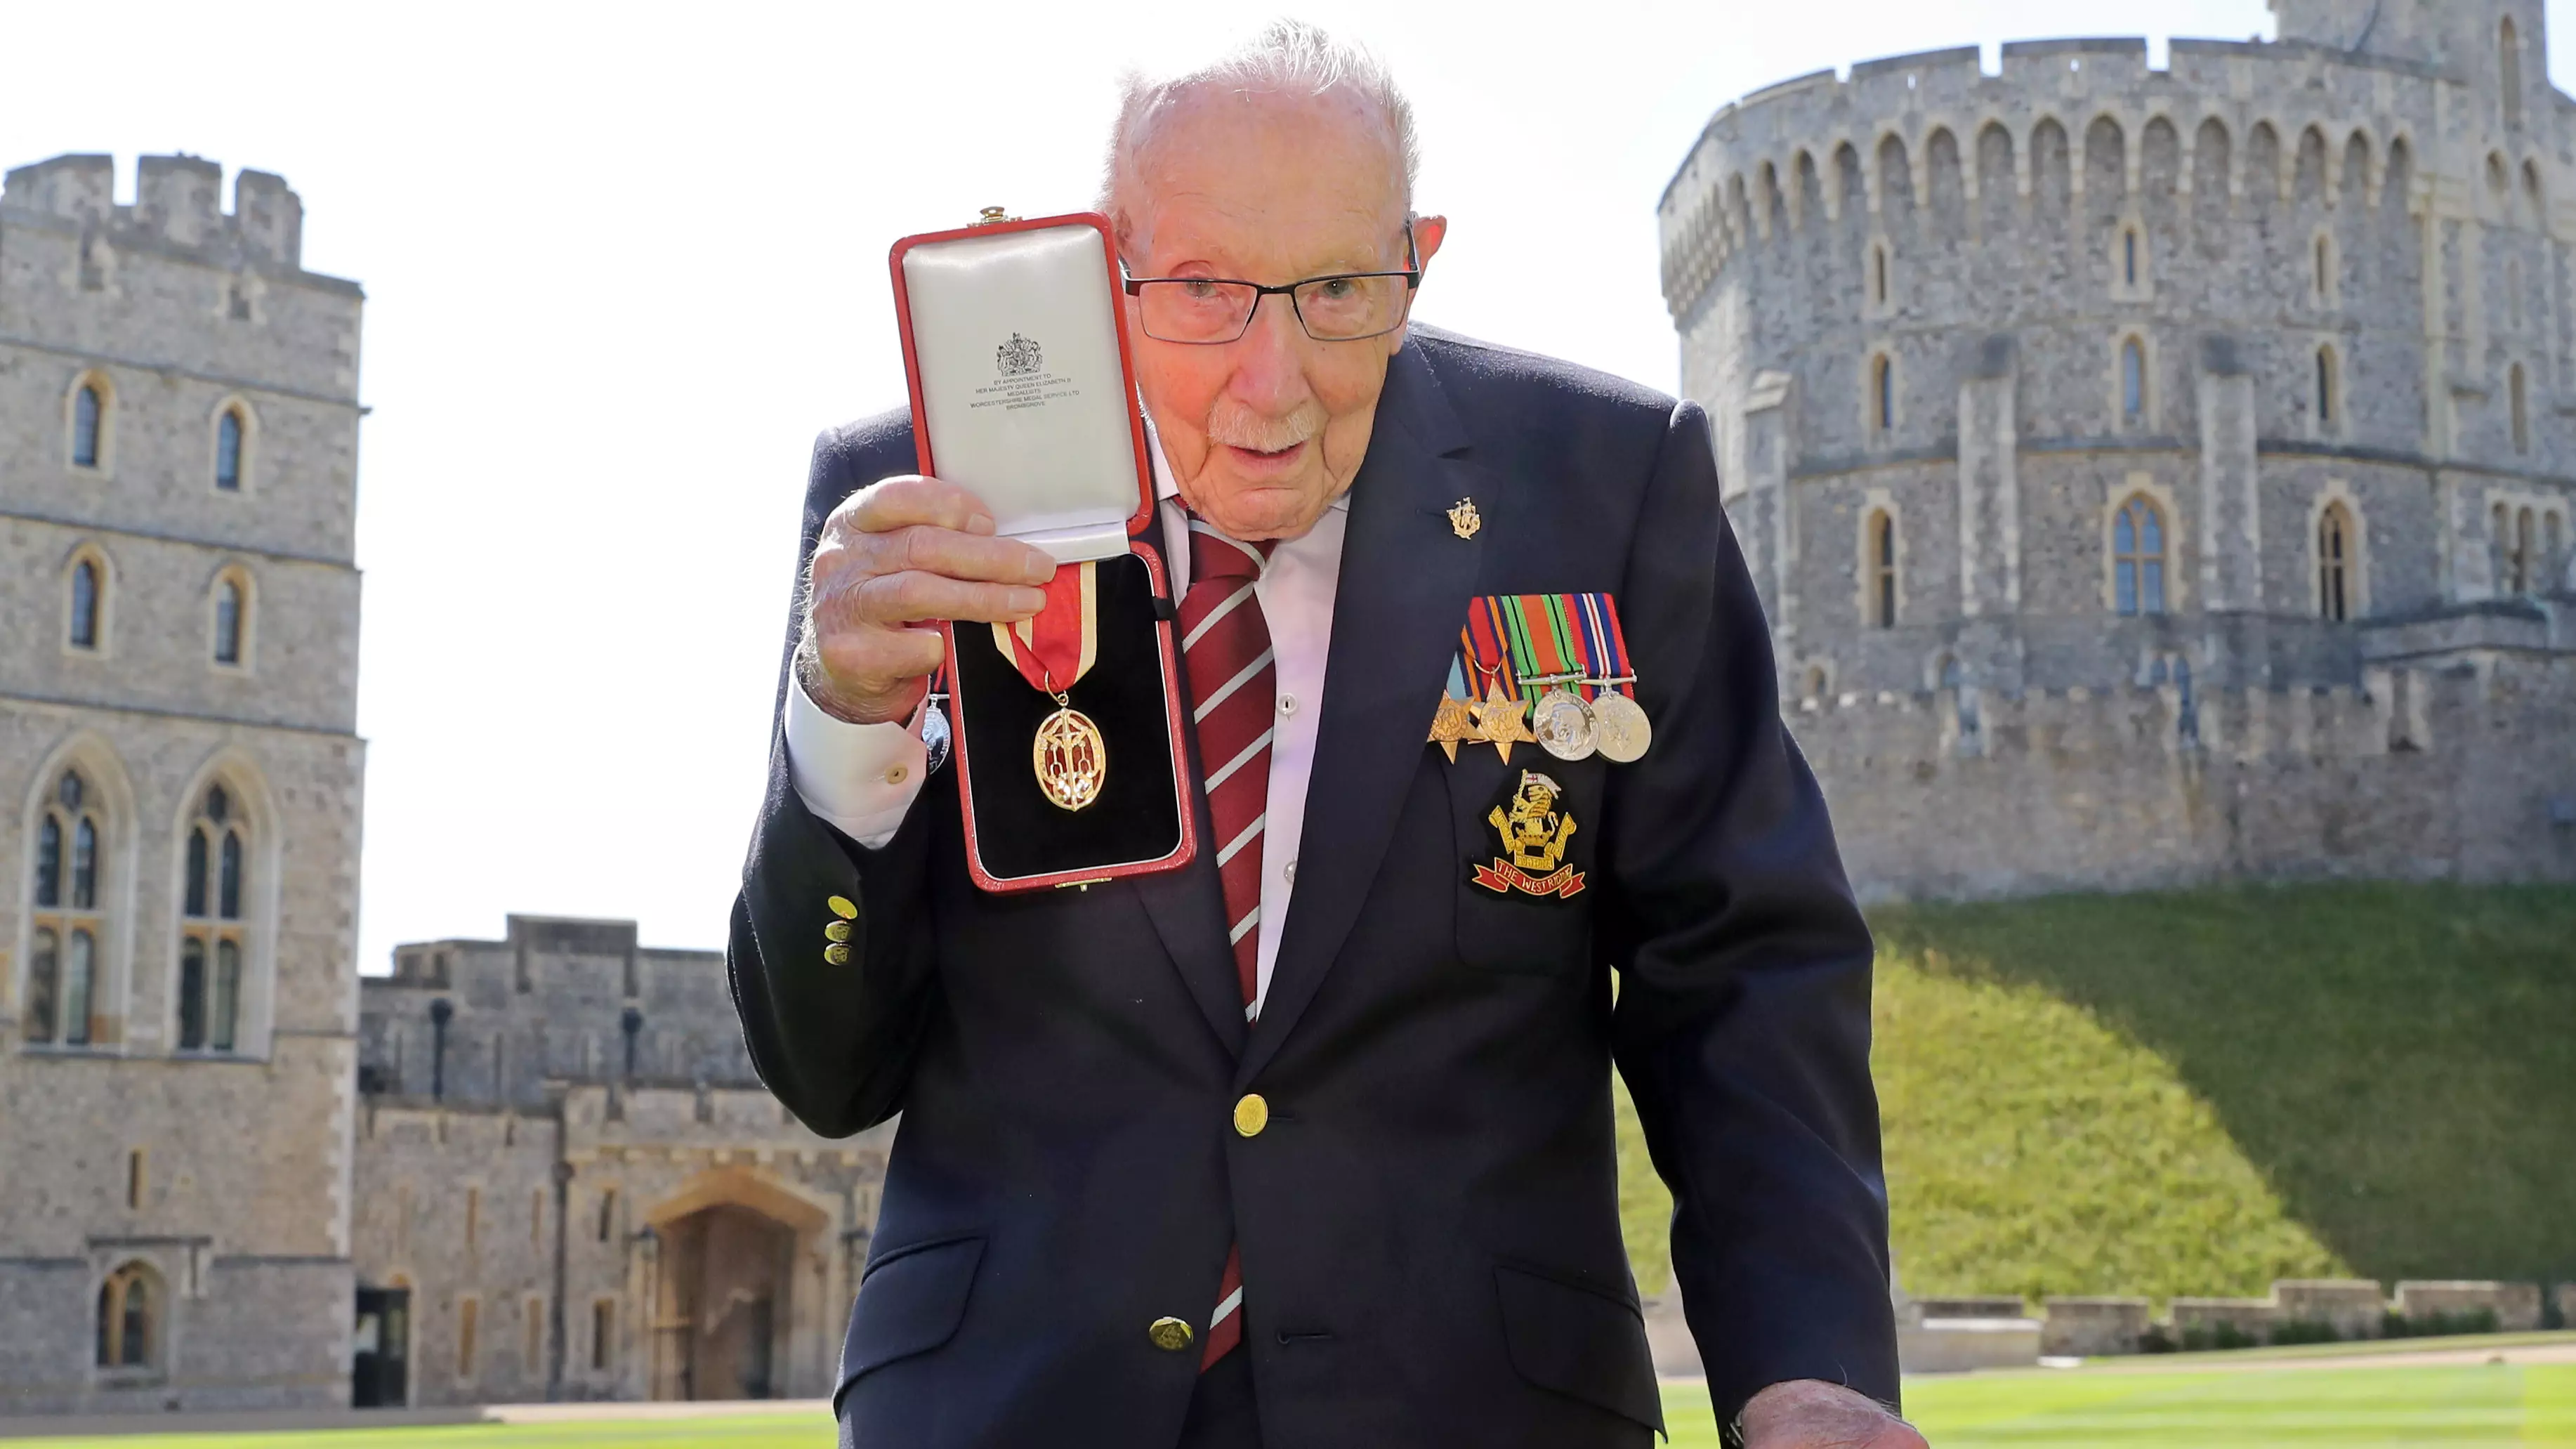 UK Fundraiser And War Hero Captain Sir Tom Moore Has Died, Aged 100